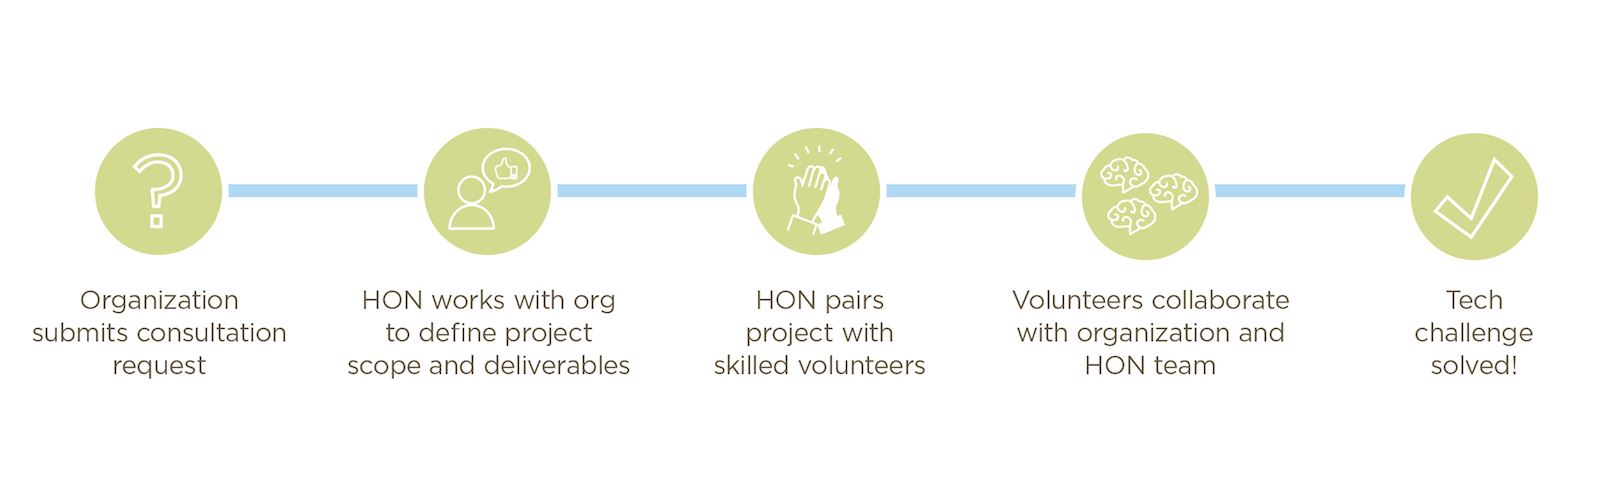 How GeekCause works: Nonprofit submits proposal to HON, HON provides consultation to define project scope, HON pairs project with skilled volunteers, volunteers collaborate with nonprofit and HON, tech challenge solved!